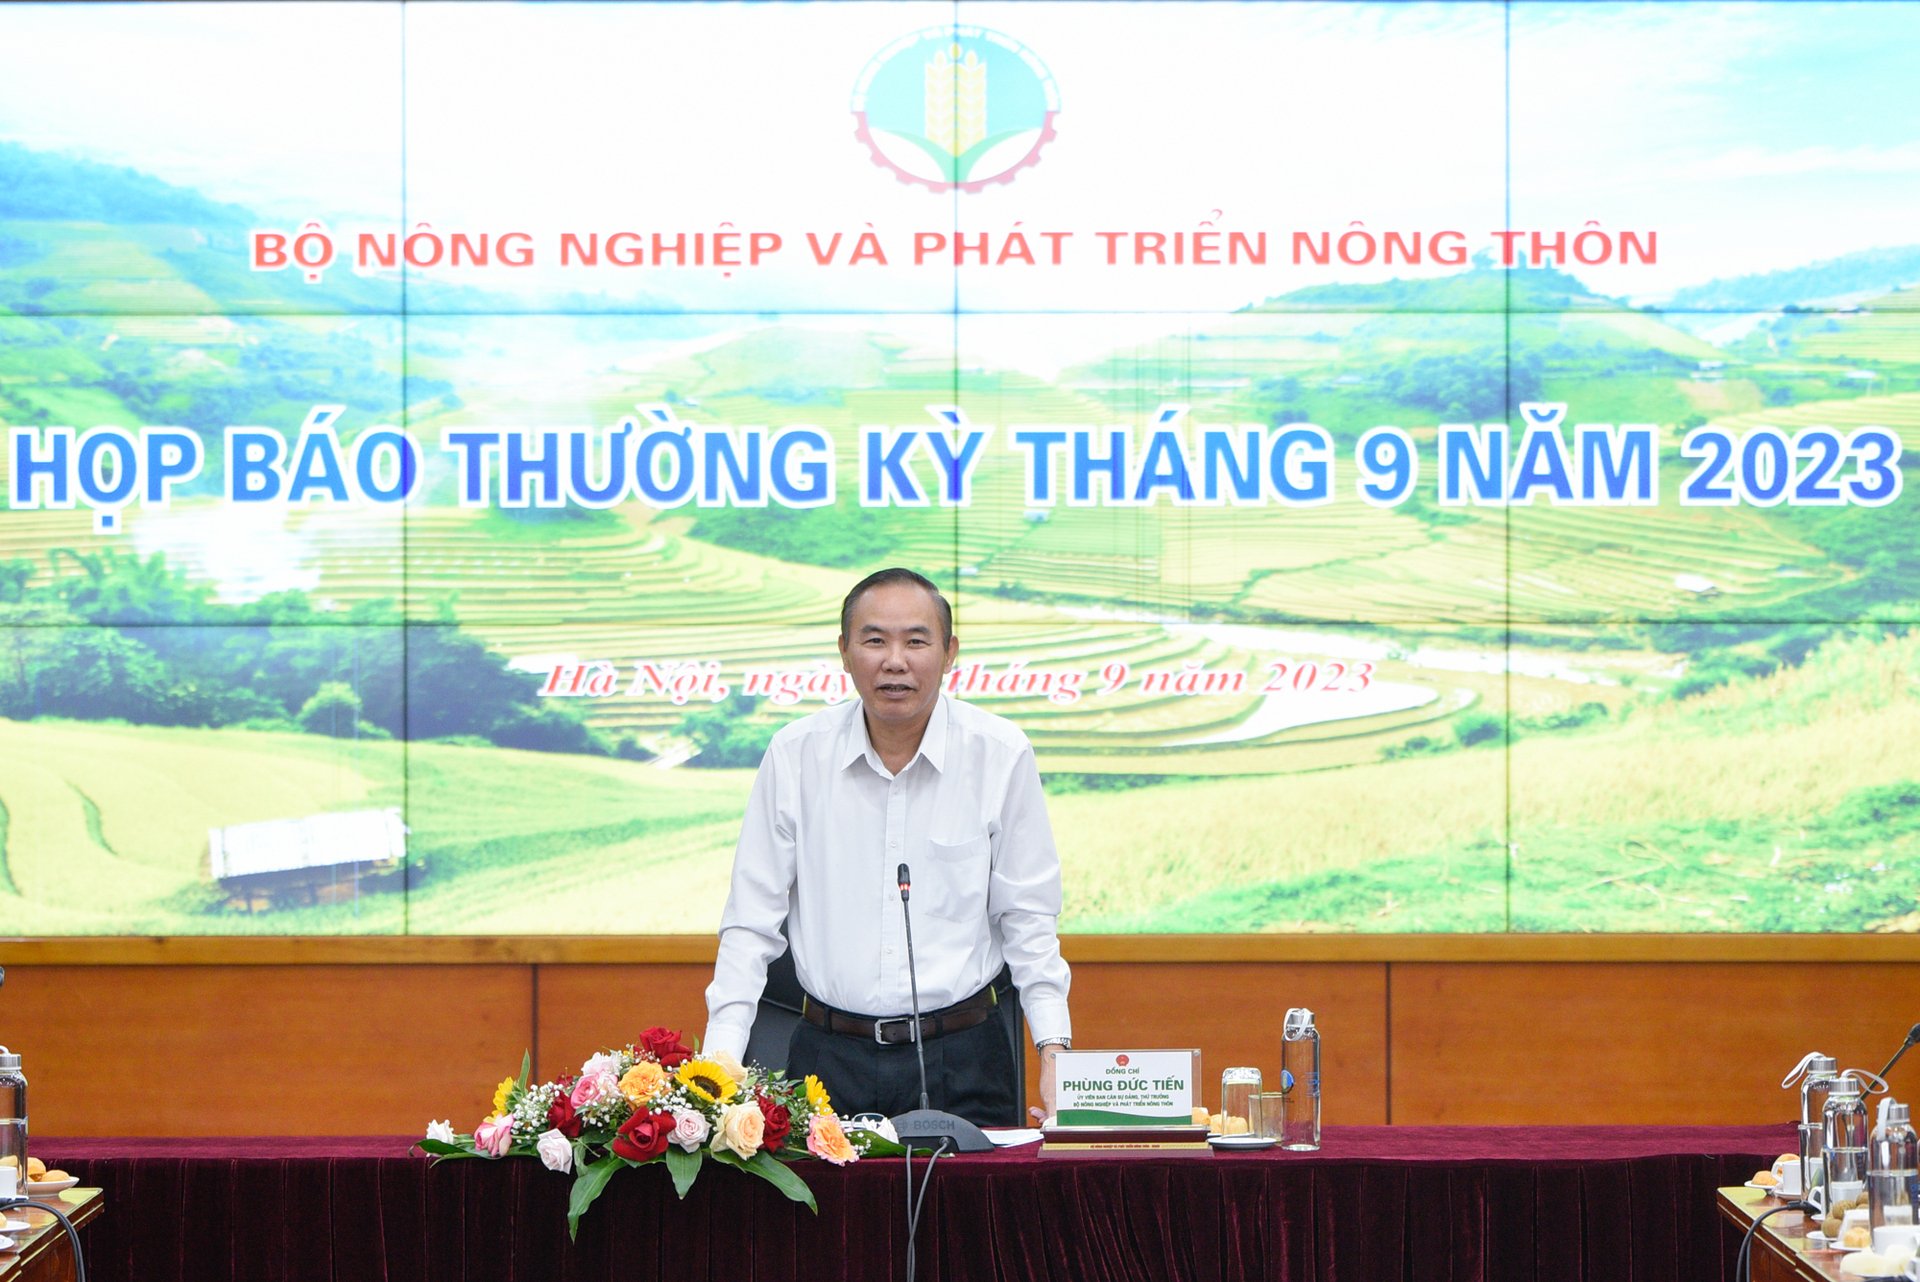 Deputy Minister Phung Duc Tien chaired the regular September press conference of the Ministry of Agriculture and Rural Development on the morning of September 29. Photo: Tung Dinh.